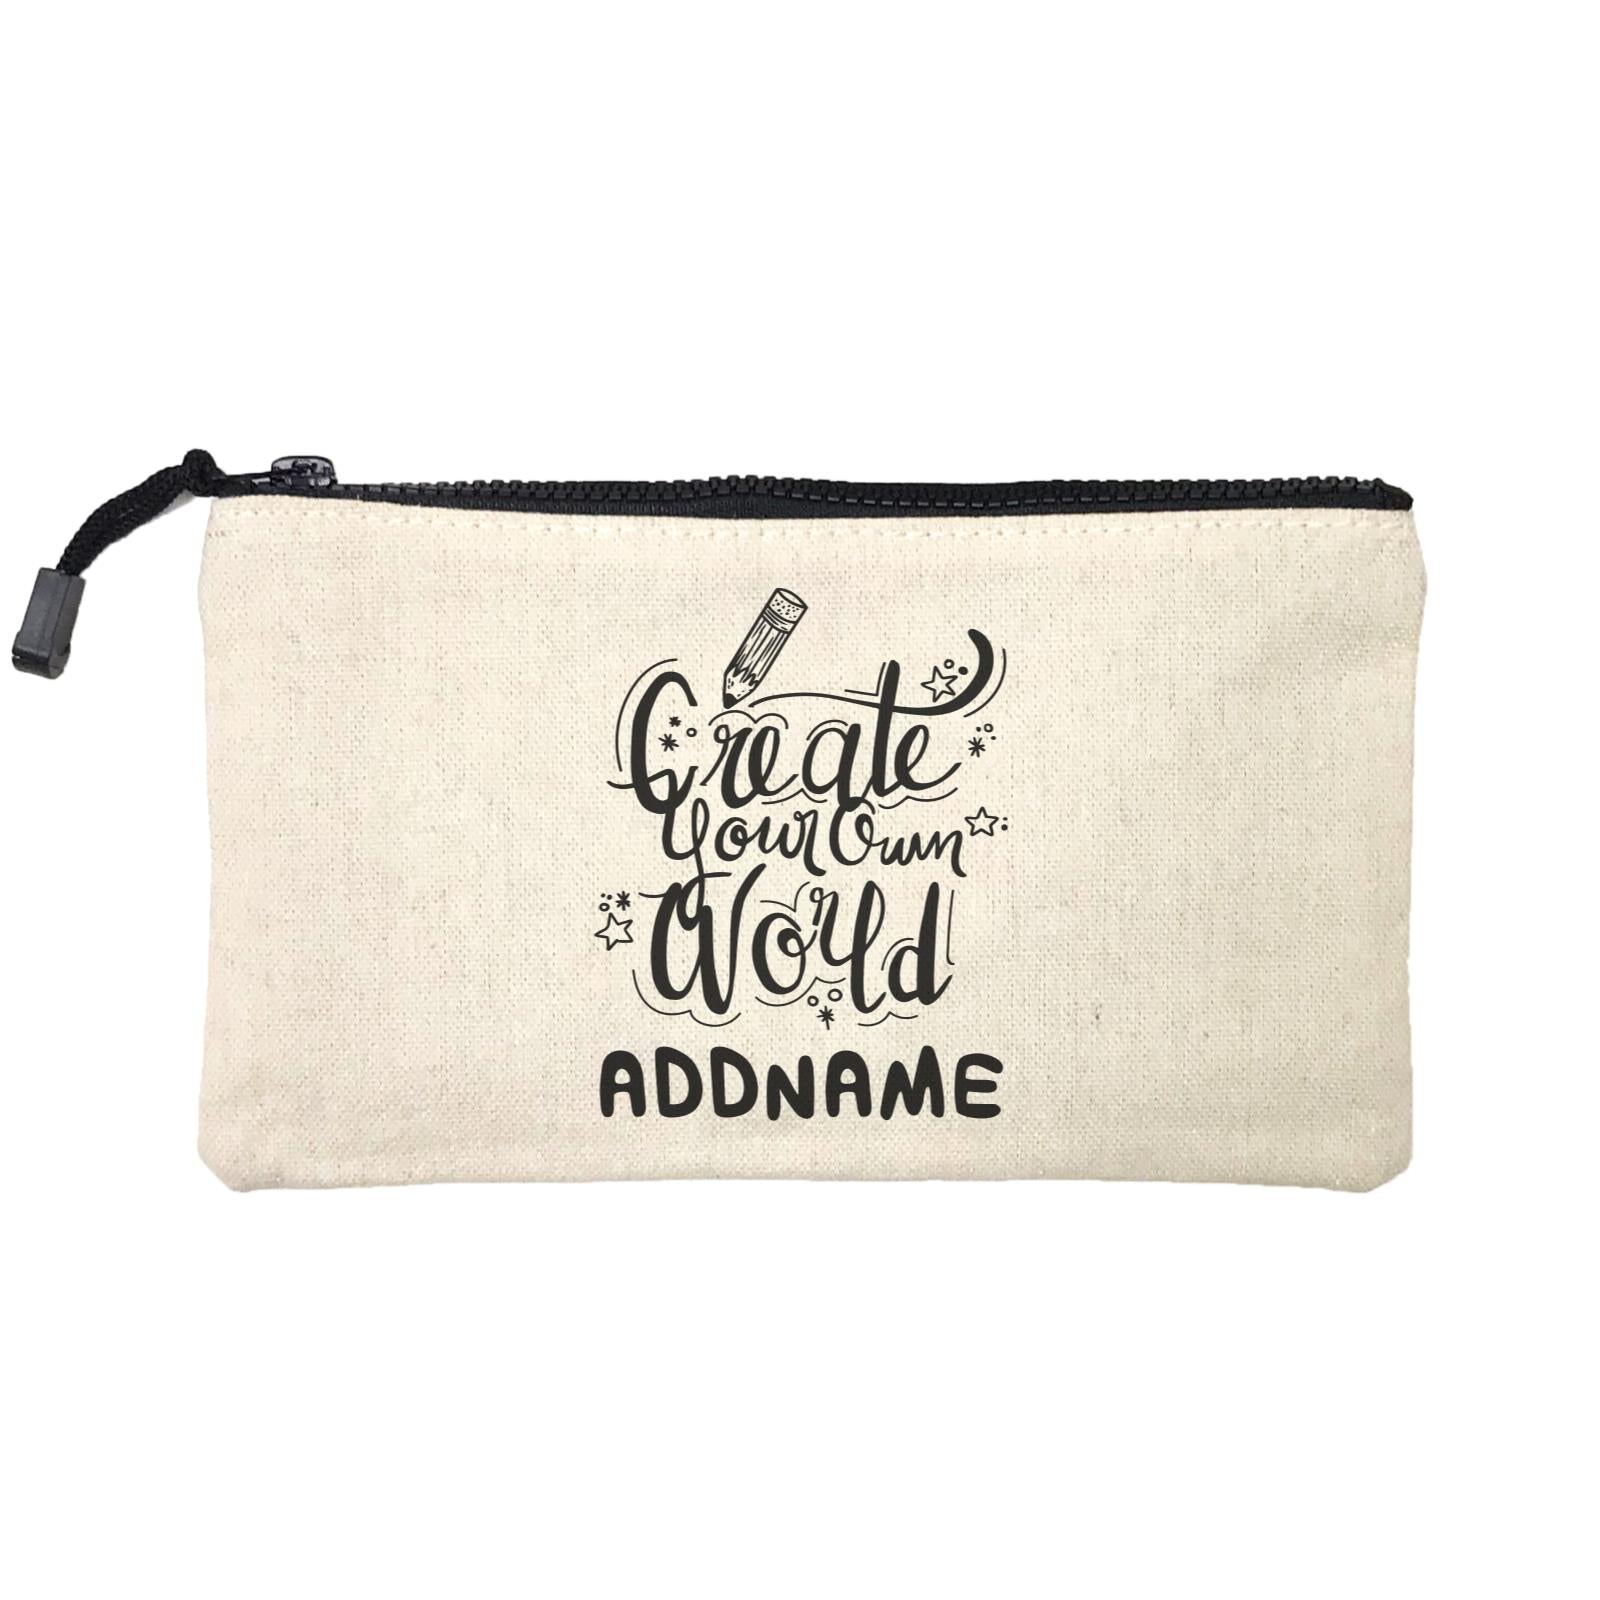 Children's Day Gift Series Create Your Own World Addname SP Stationery Pouch